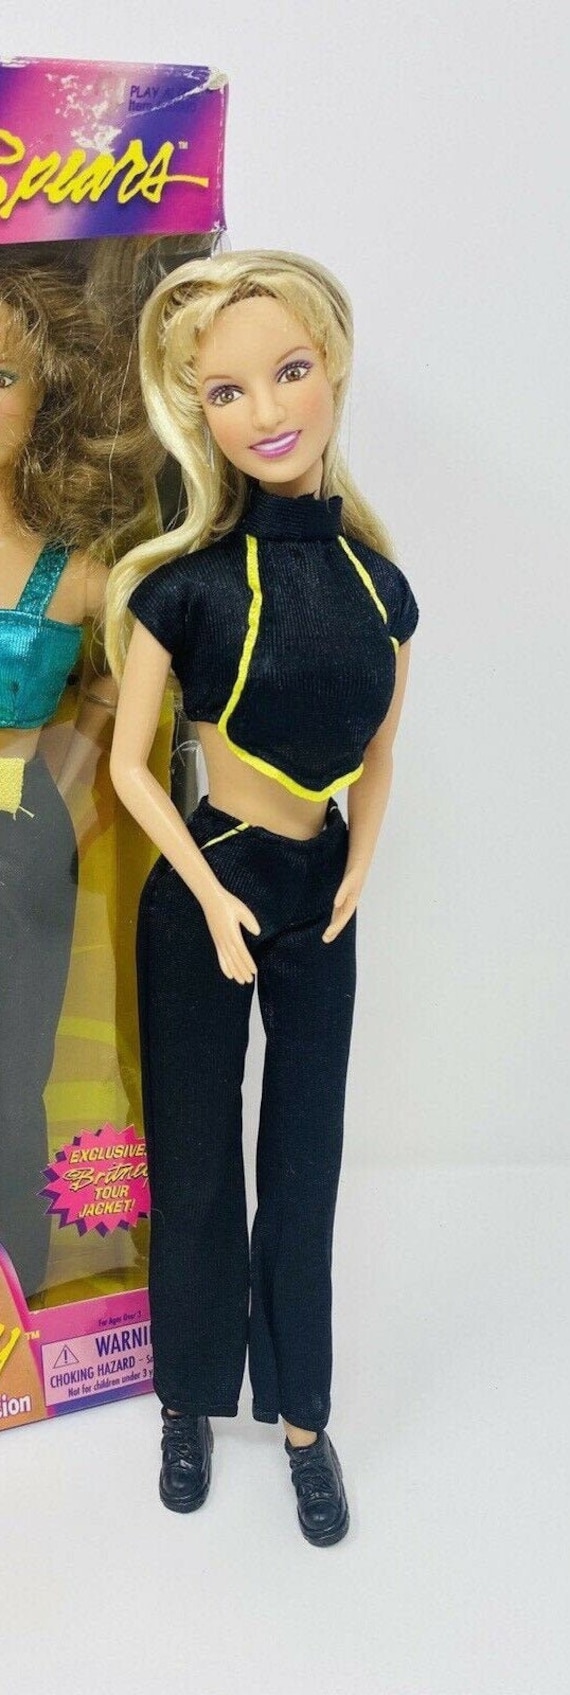 Vintage 1990's Britney Spears 'you Drive Me Crazy' Barbie Doll 